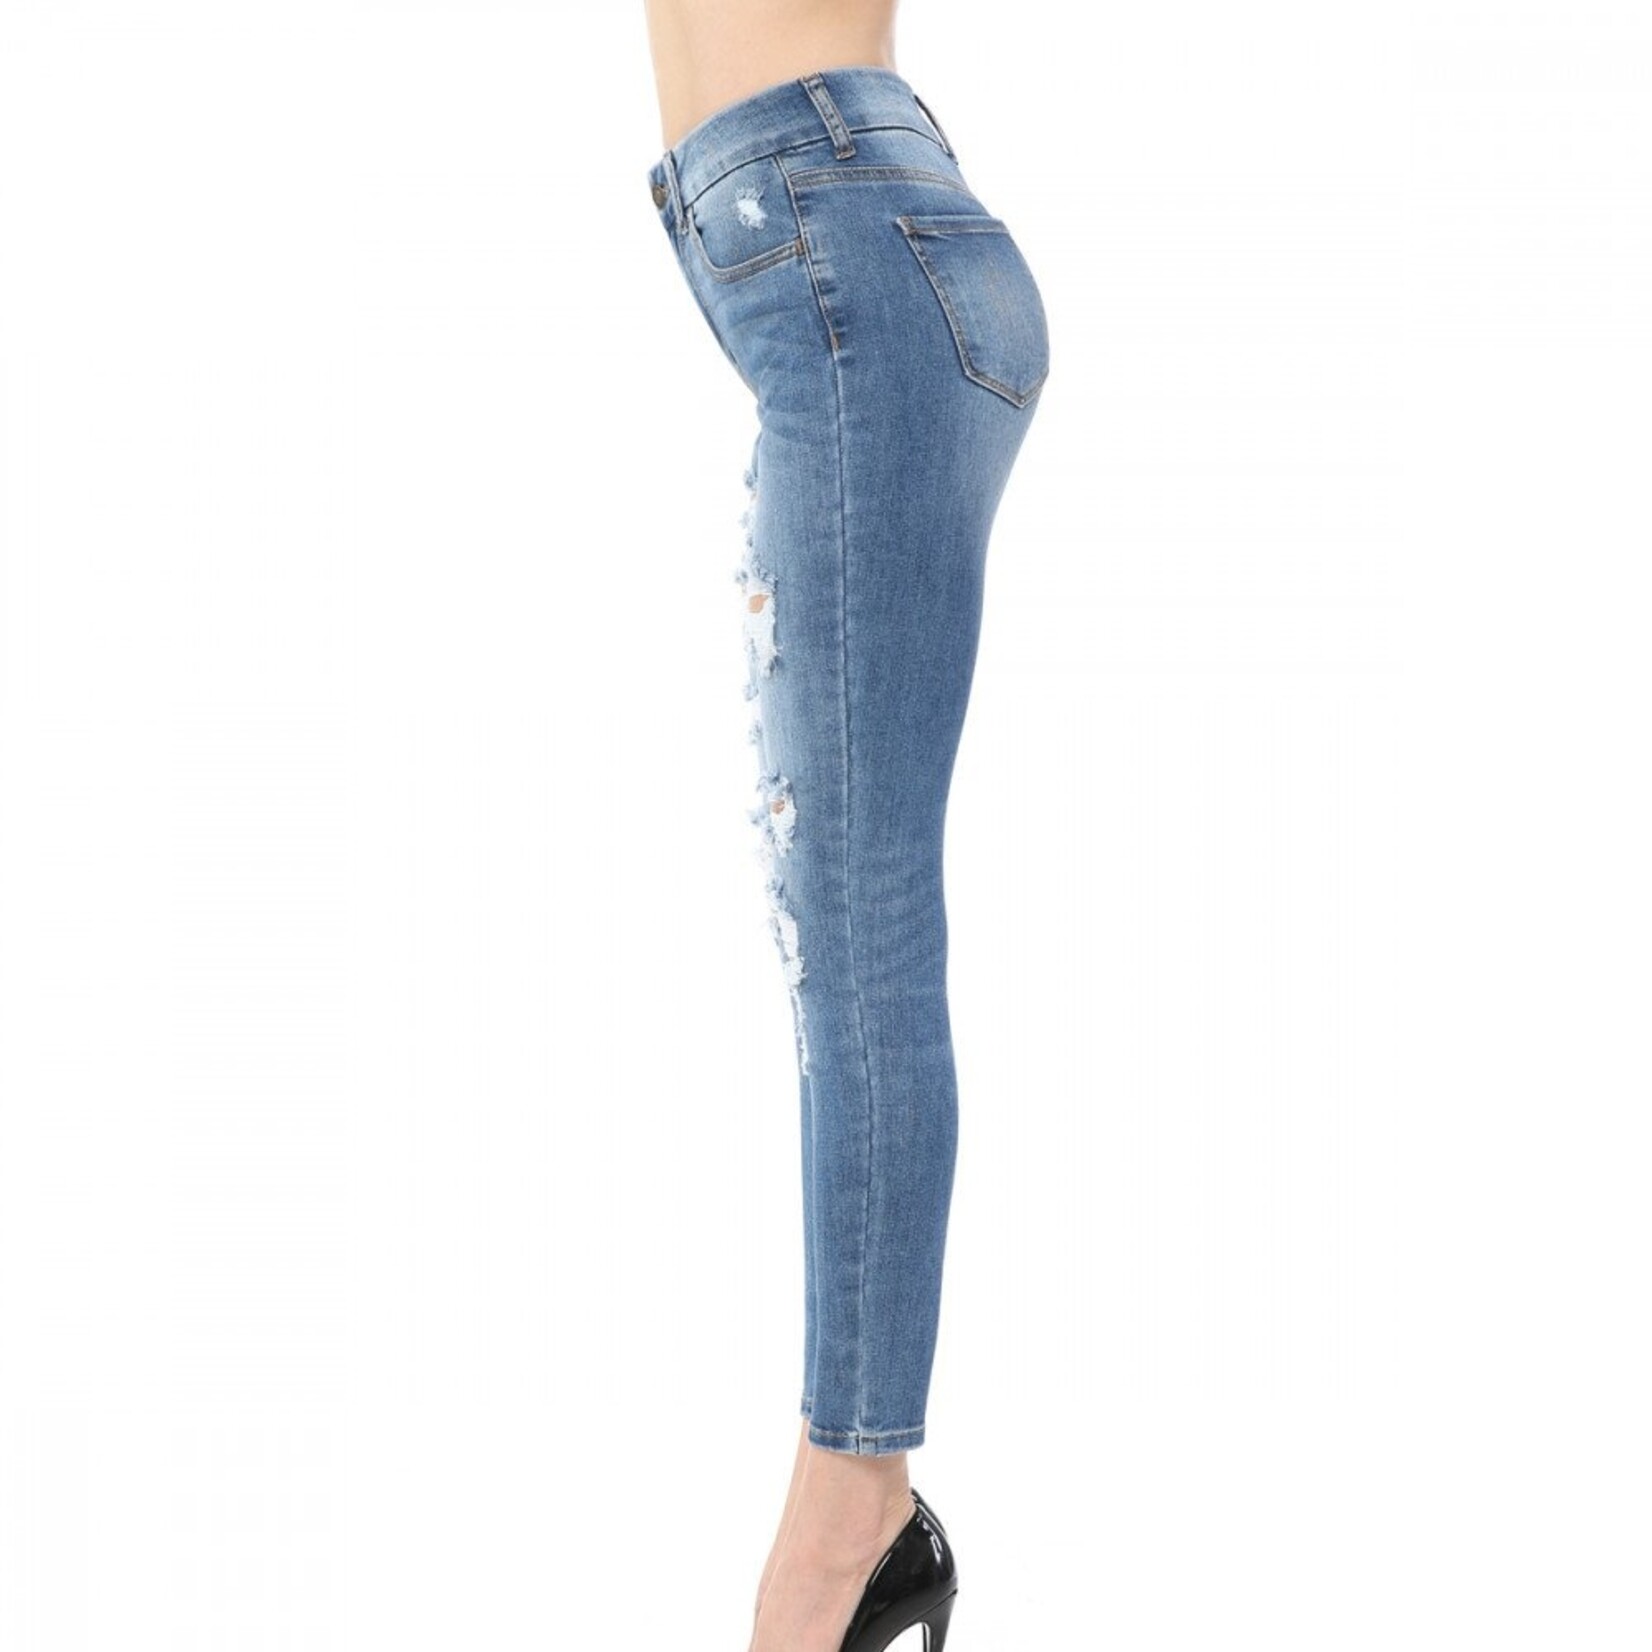 Wax Jeans Women's Sustainable Denim Distressed Jeans - 90225